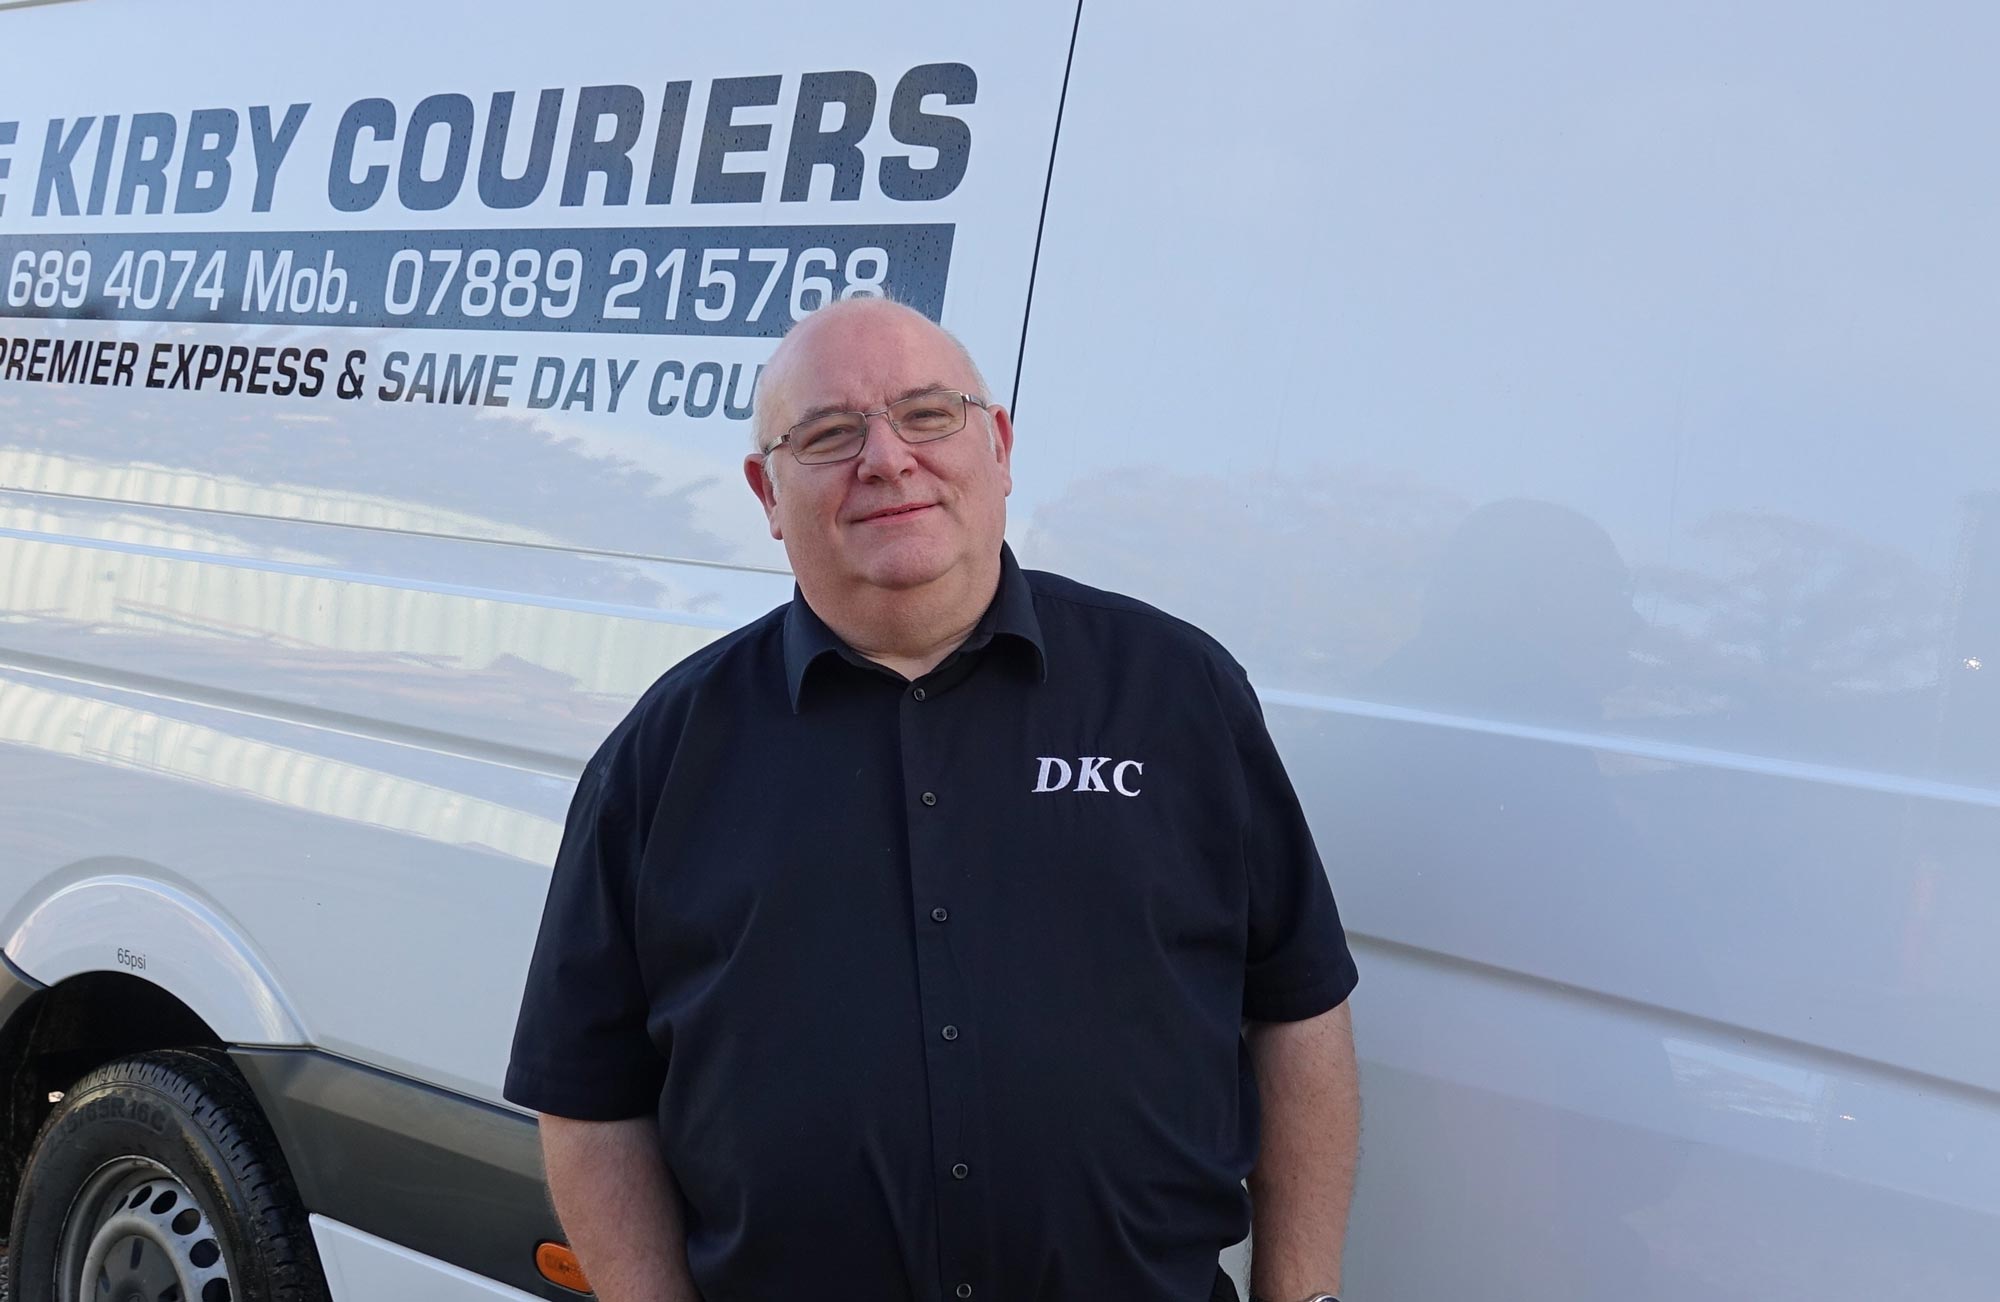 Driving Forward With Investment! Andrew Dennis, FD of Dave Kirby Couriers (2018) Ltd